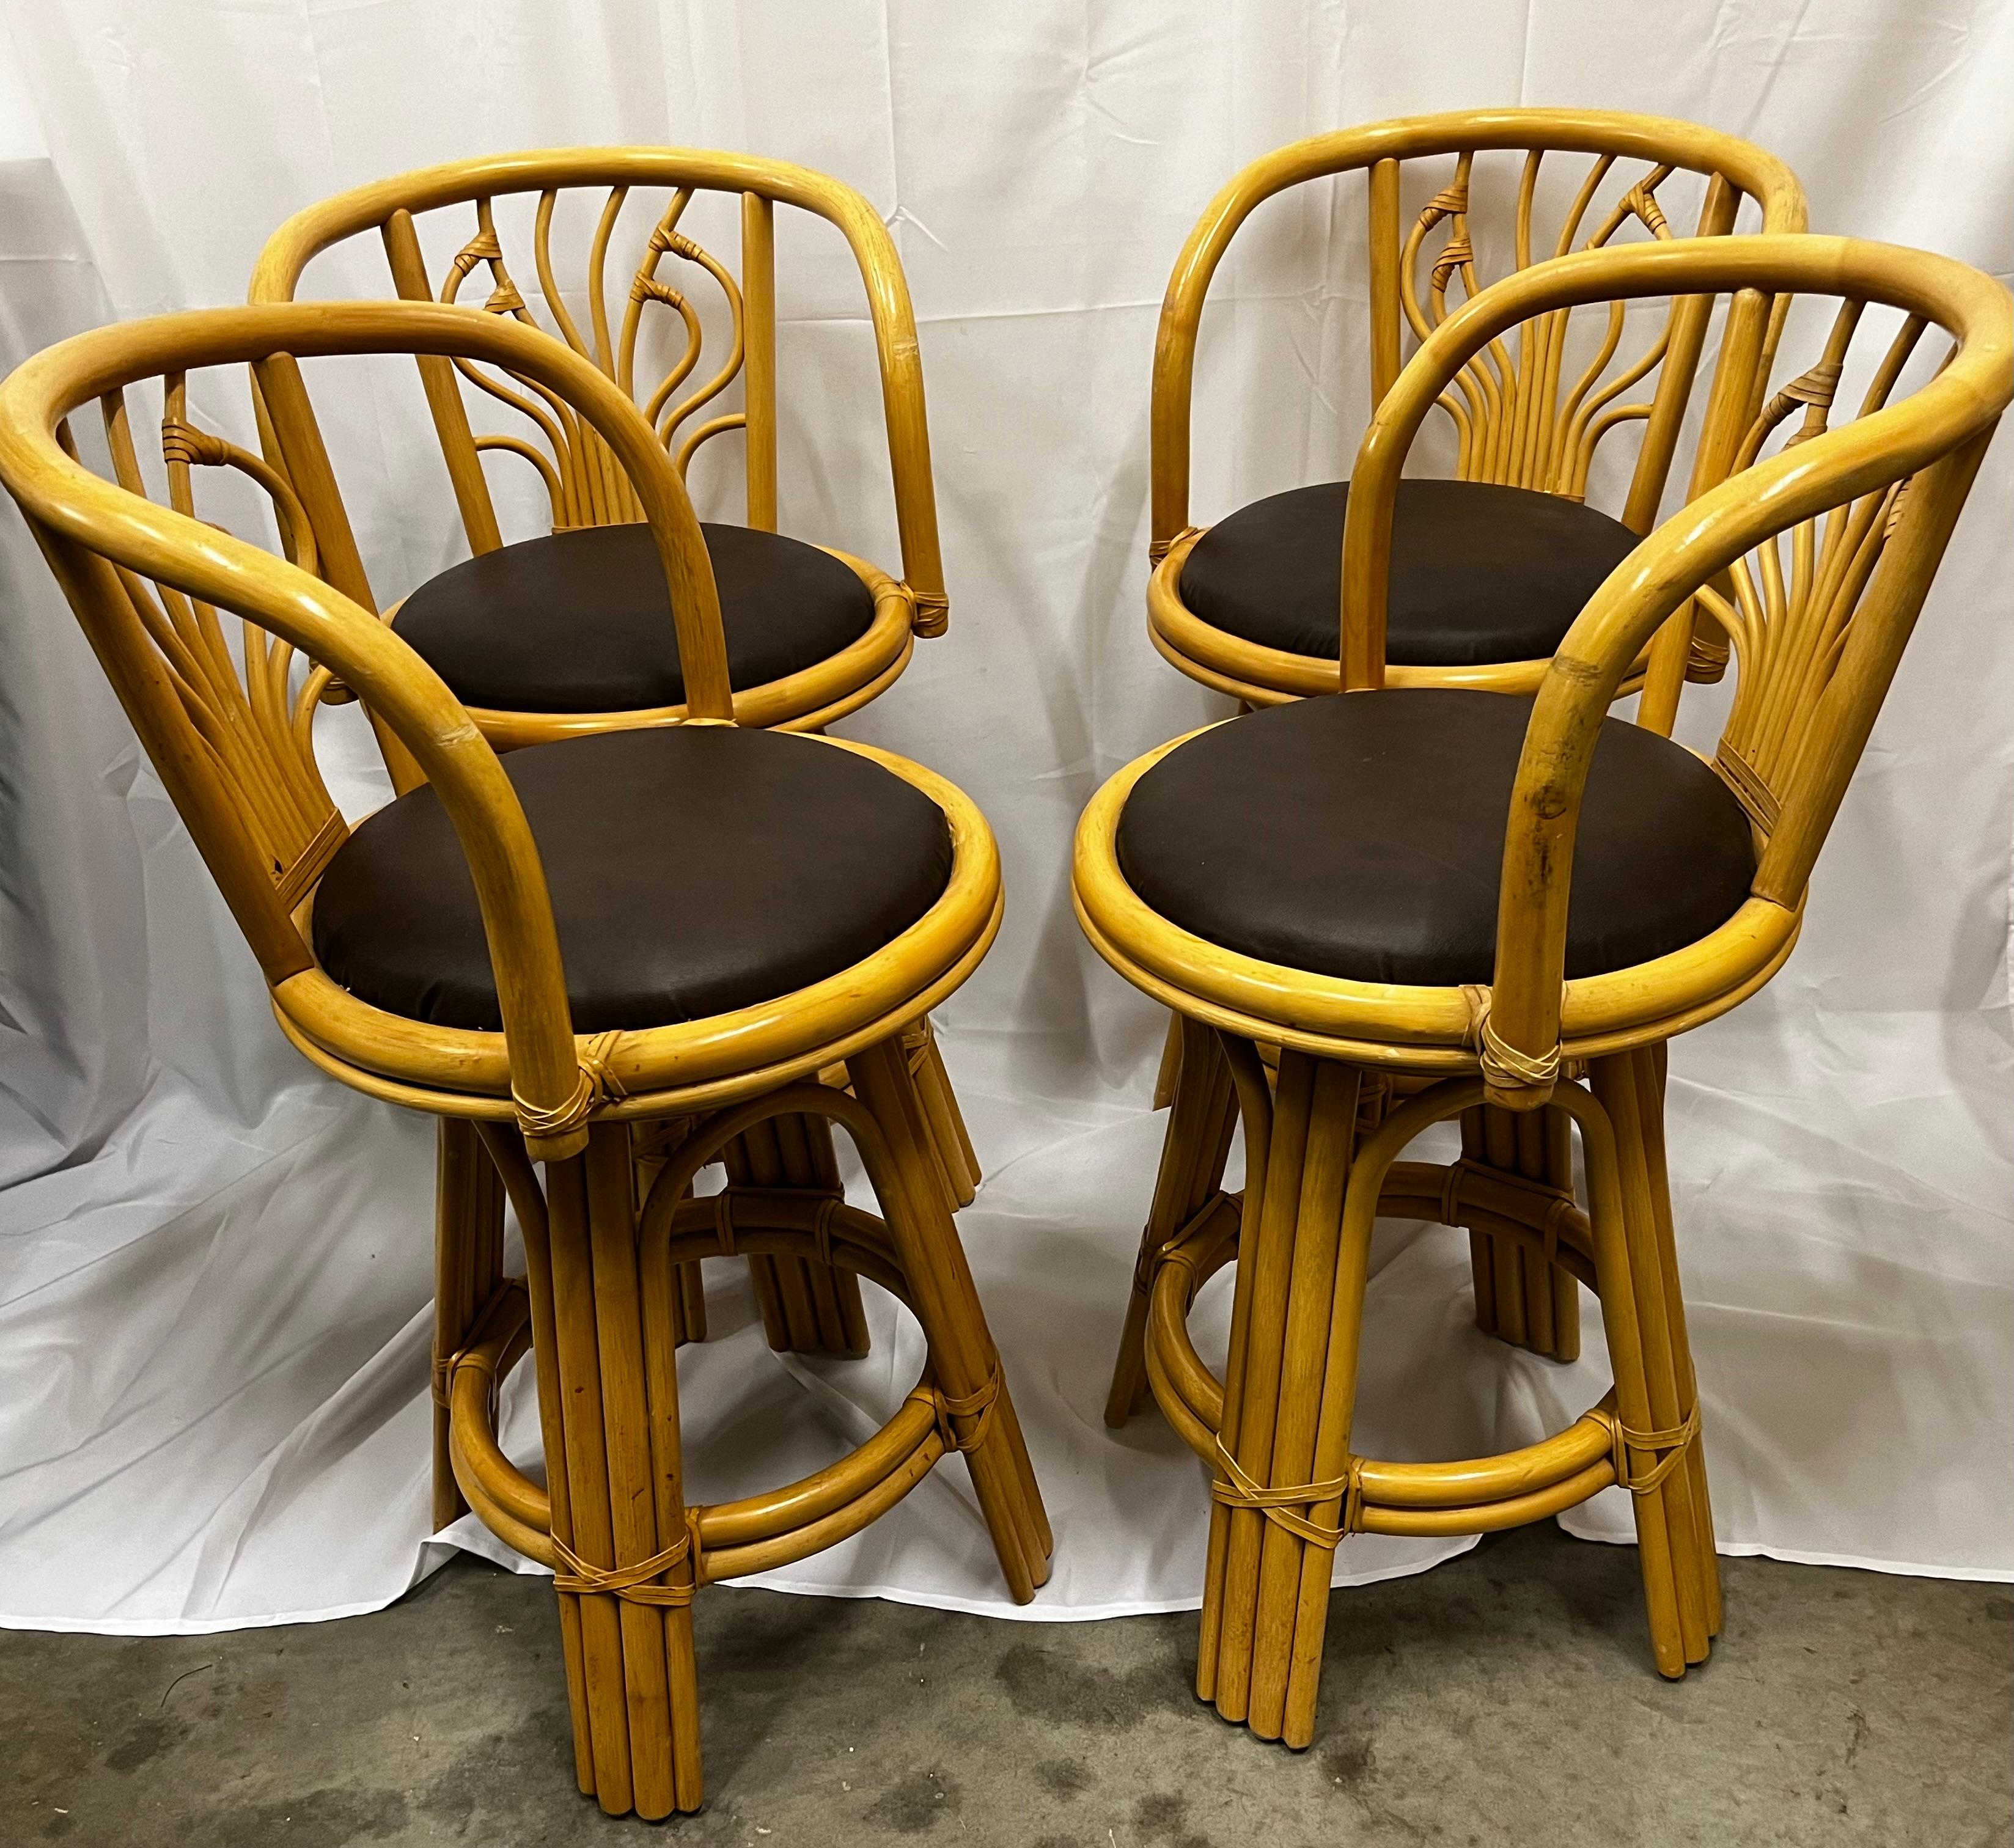 Set of four ficks Reed Style Swivel Rattan bar stools laced with bamboo strips.
The round seats are upholstered in a brown fabric and are in perfect condition.
The general condition of the bar stools is excellent.